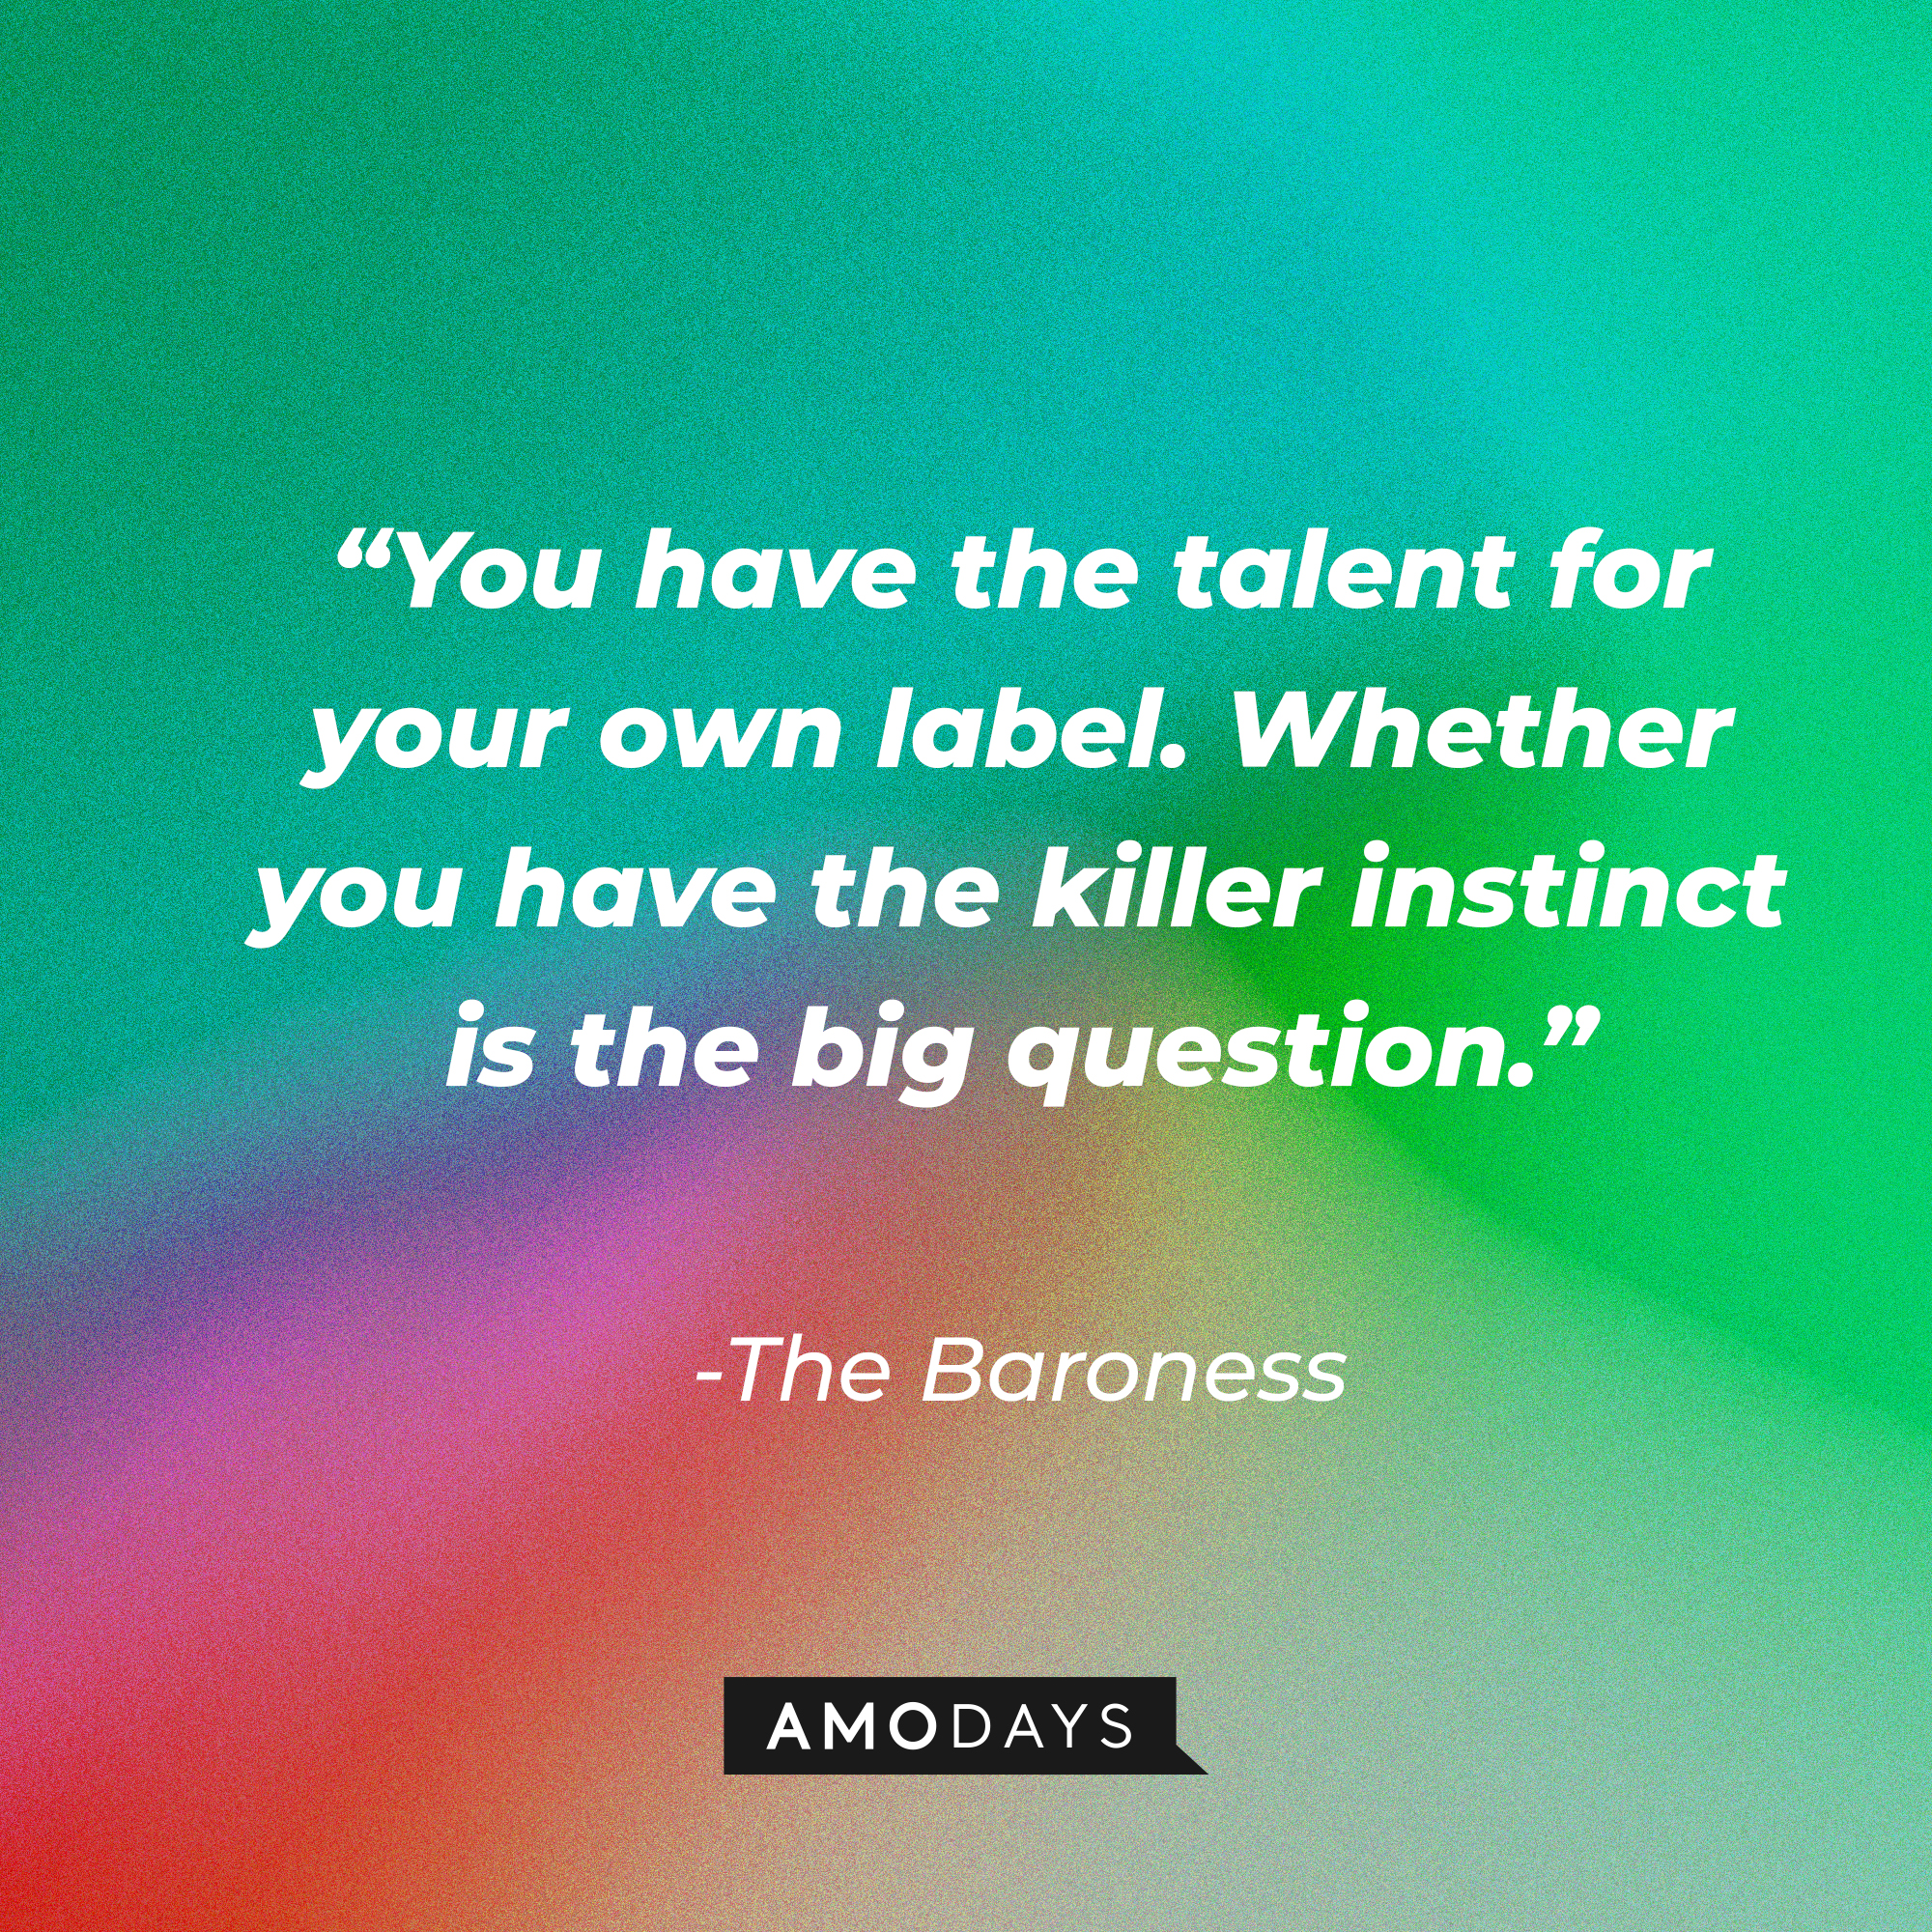 The Baroness's quote: “You have the talent for your own label. Whether you have the killer instinct is the big question.” | Source: Amodays